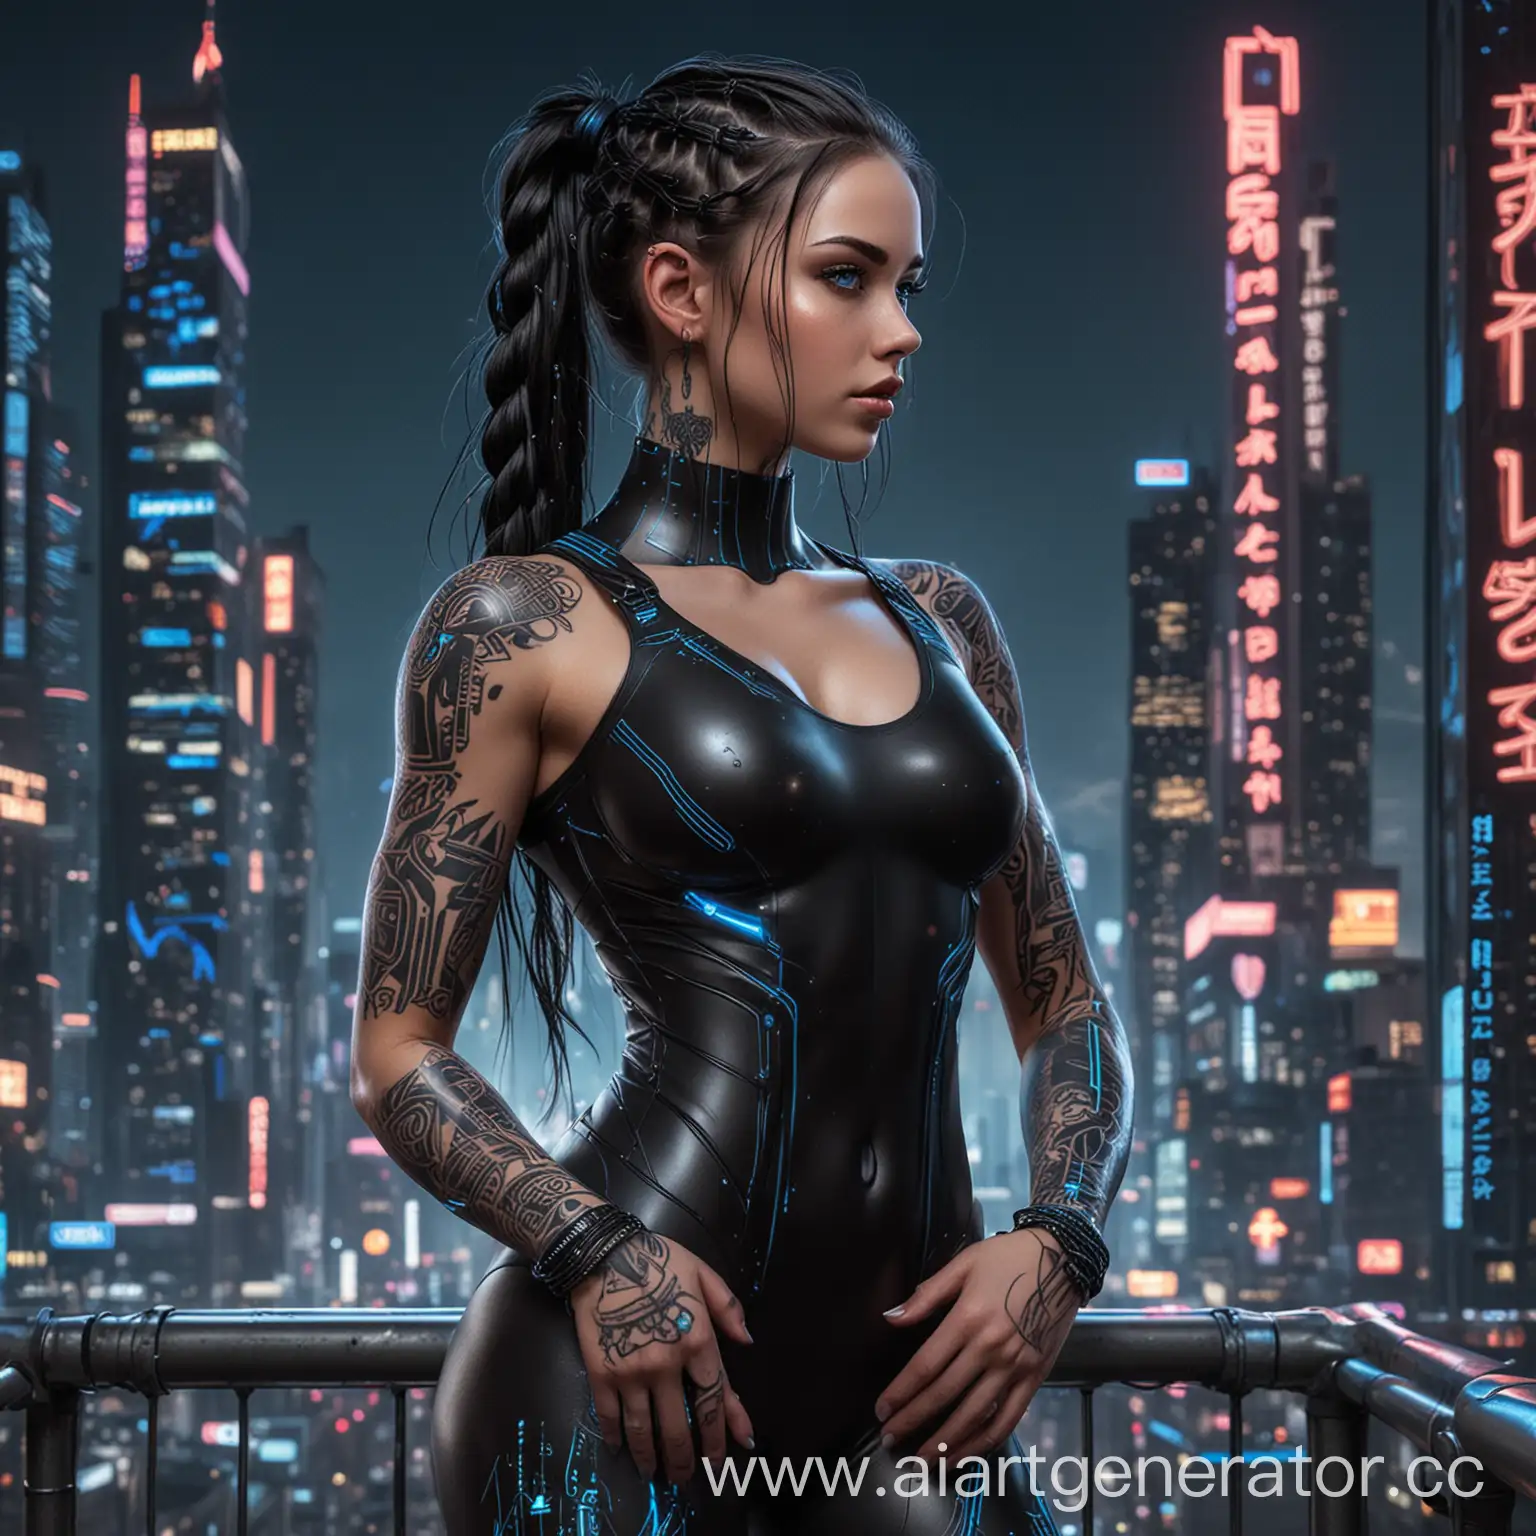 A young woman in her mid-20s, with long black hair styled in braids or a ponytail. She has bright blue eyes that glow in the dark. girl in full height. She is wearing a form-fitting black bodysuit with neon accents, highlighting her athletic figure and cybernetic enhancements. She has a neural interface on her temple, cybernetic enhancements on her arms, and glowing tattoos on her body that change color and pattern depending on her mood and activity. Her expression is confident and determined, with a hint of rebelliousness. The background is a futuristic cityscape at night, with towering skyscrapers and neon signs.